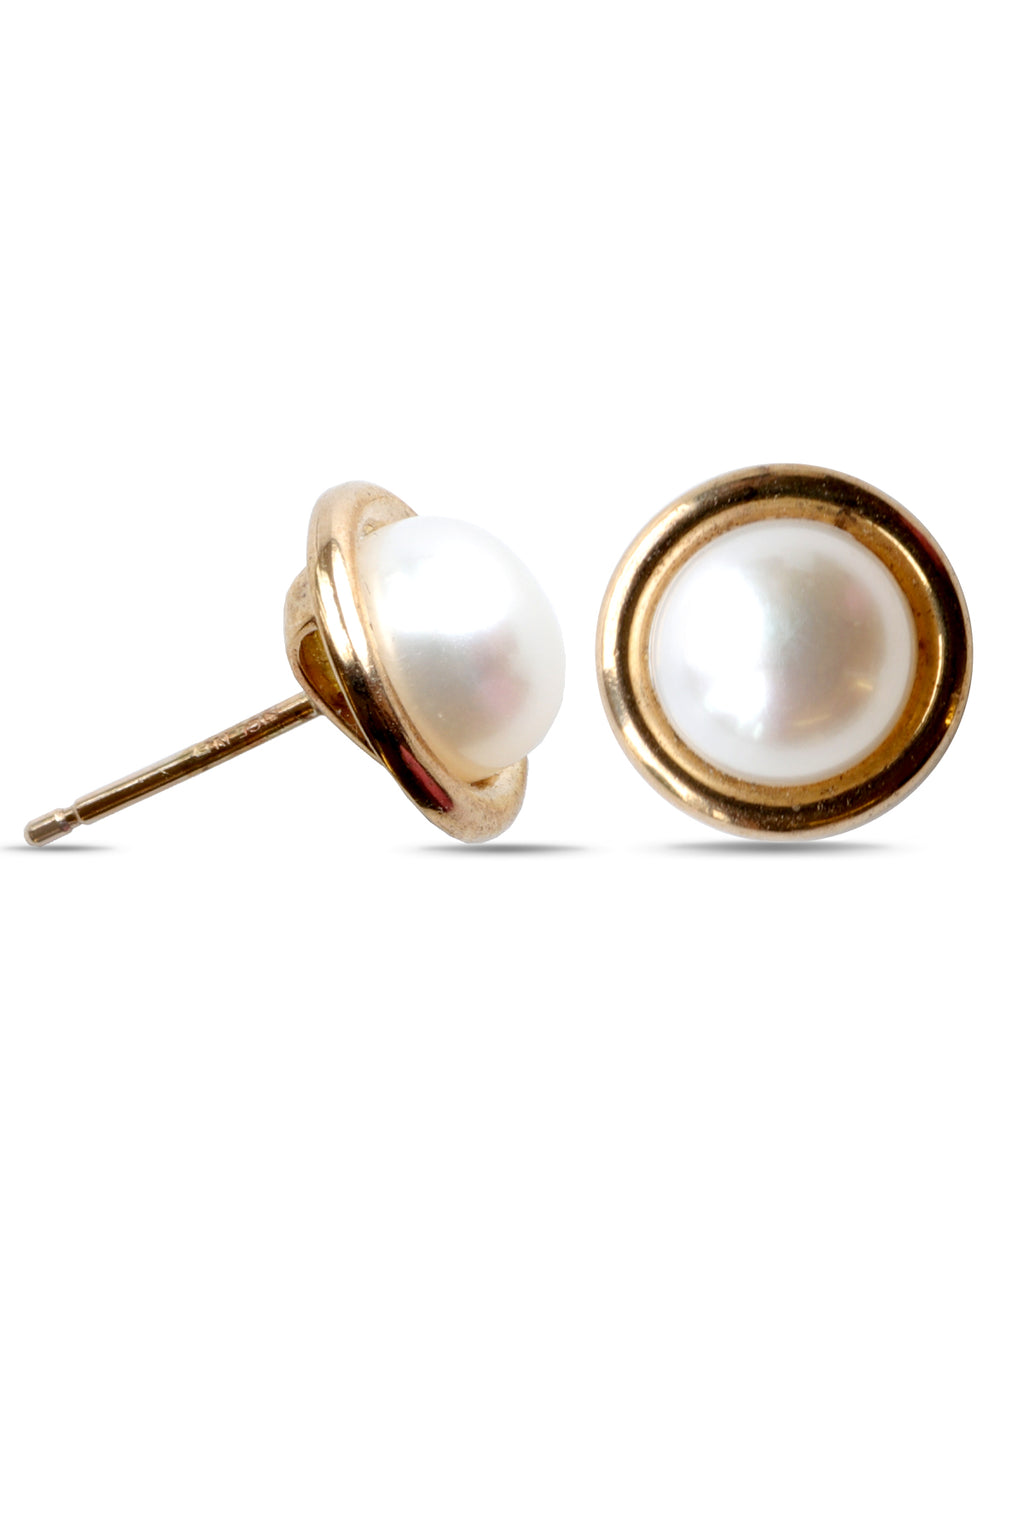 9ct Gold Earring FW Pearl Button